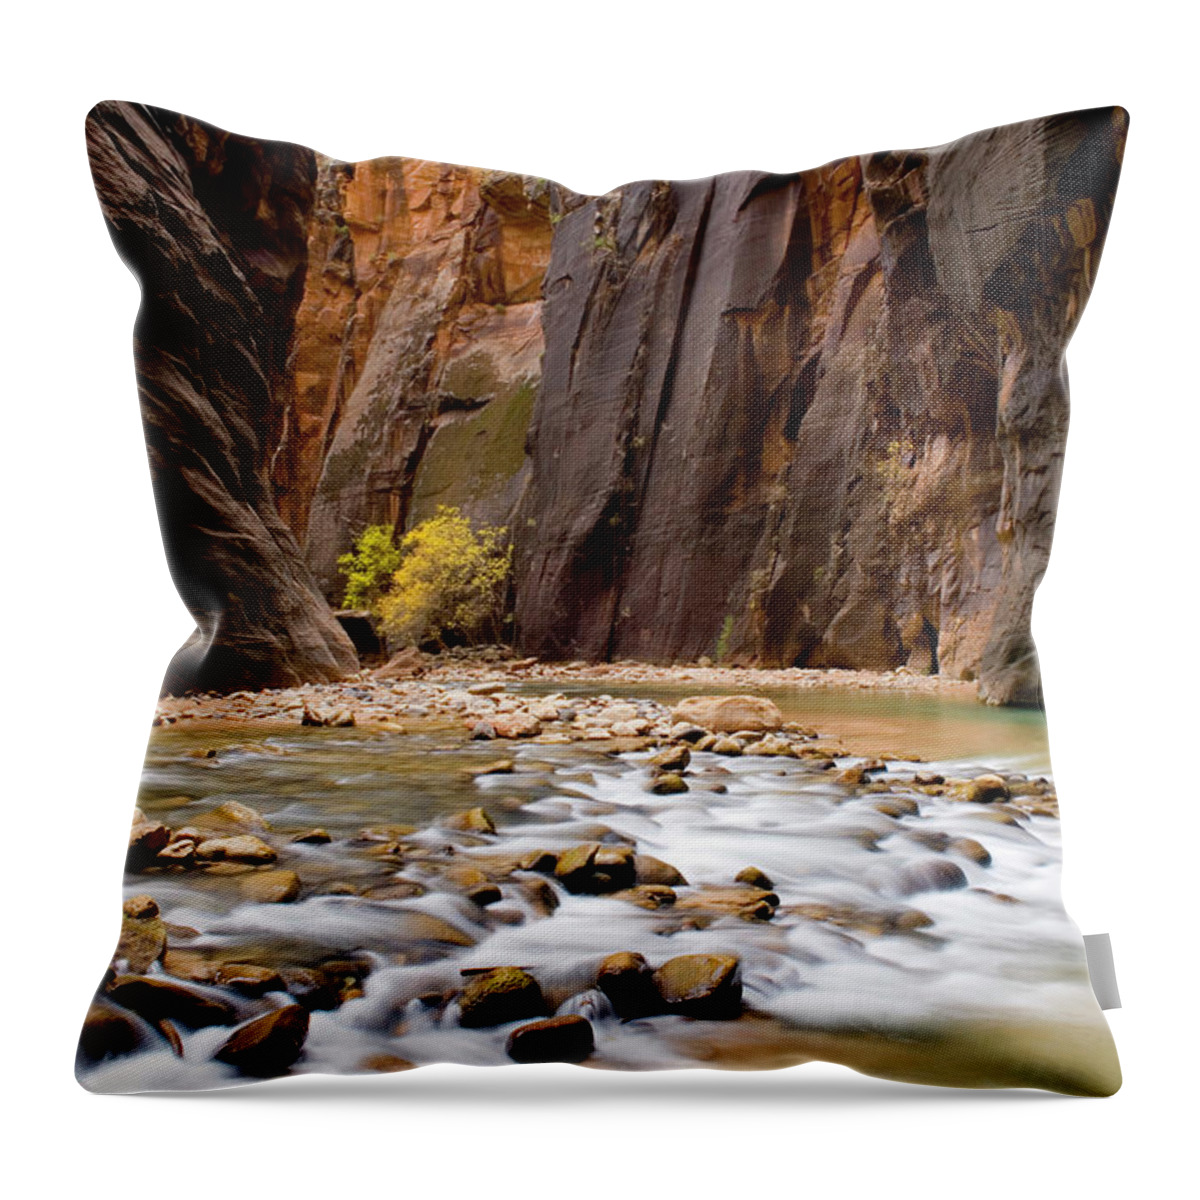 Tranquility Throw Pillow featuring the photograph The Virgin River Flowing Through The by Alan Majchrowicz